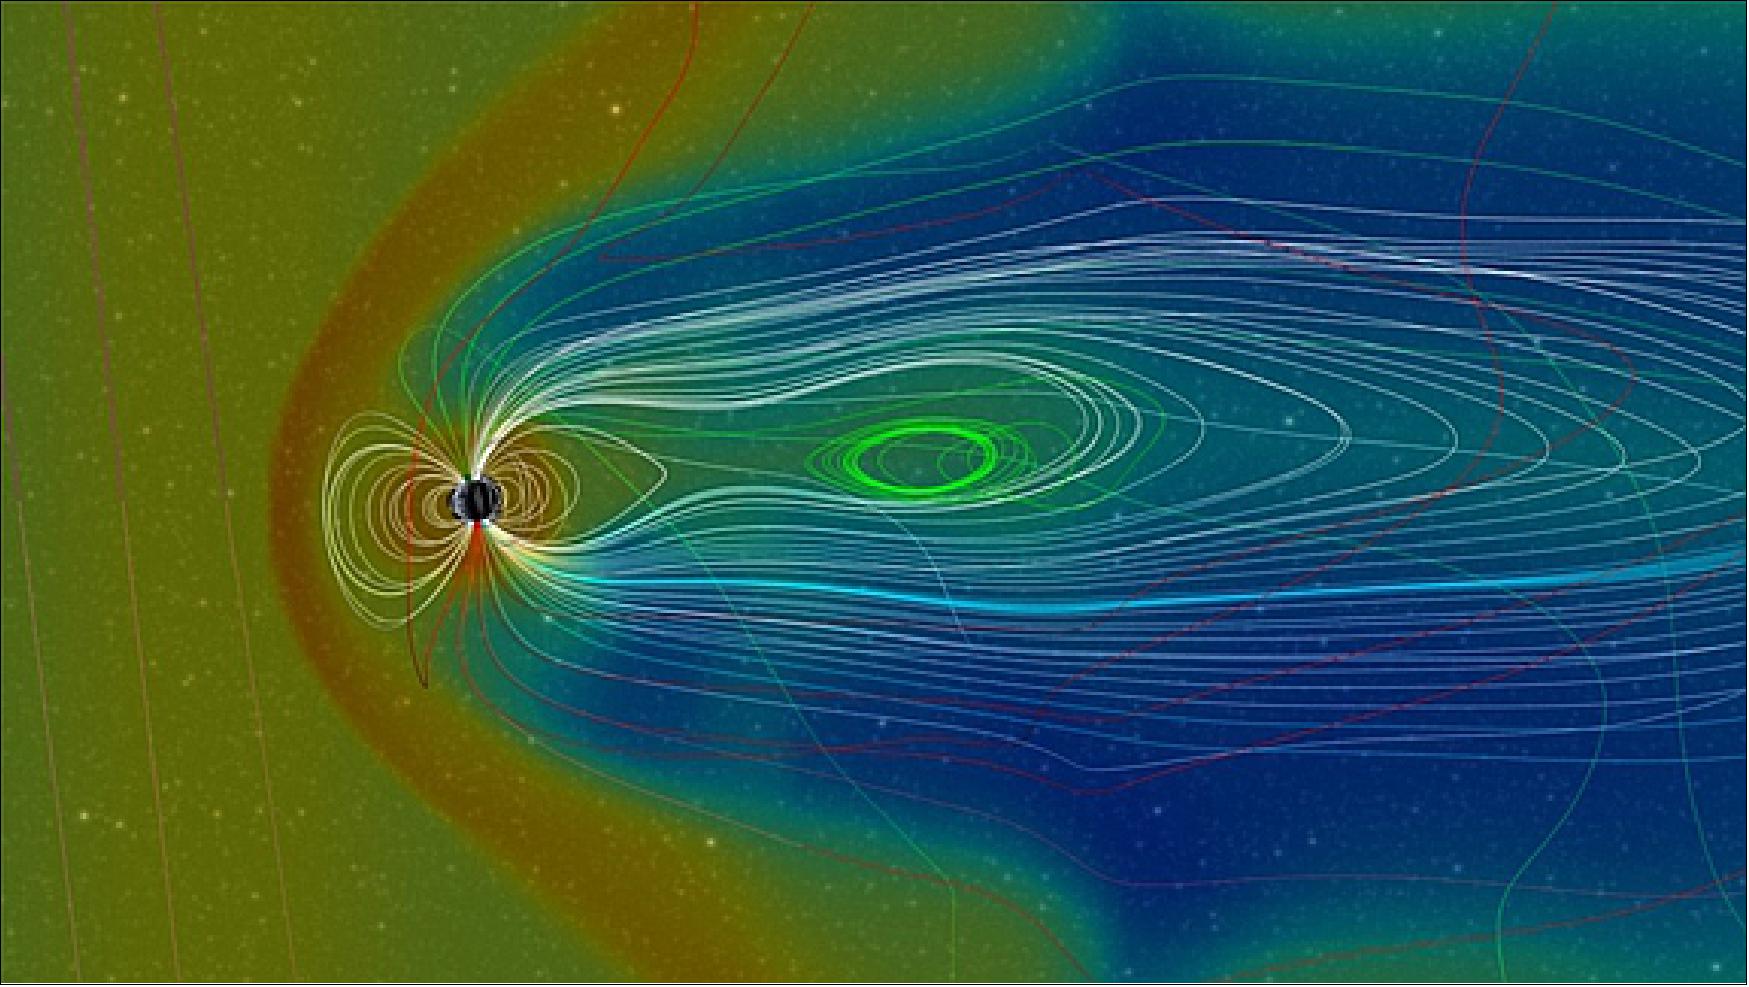 Figure 37: This graphic shows the magnetic field surrounding the Earth and how it reacted to energy and plasma from a solar flare caused by magnetic reconnection (image credit: NASA)